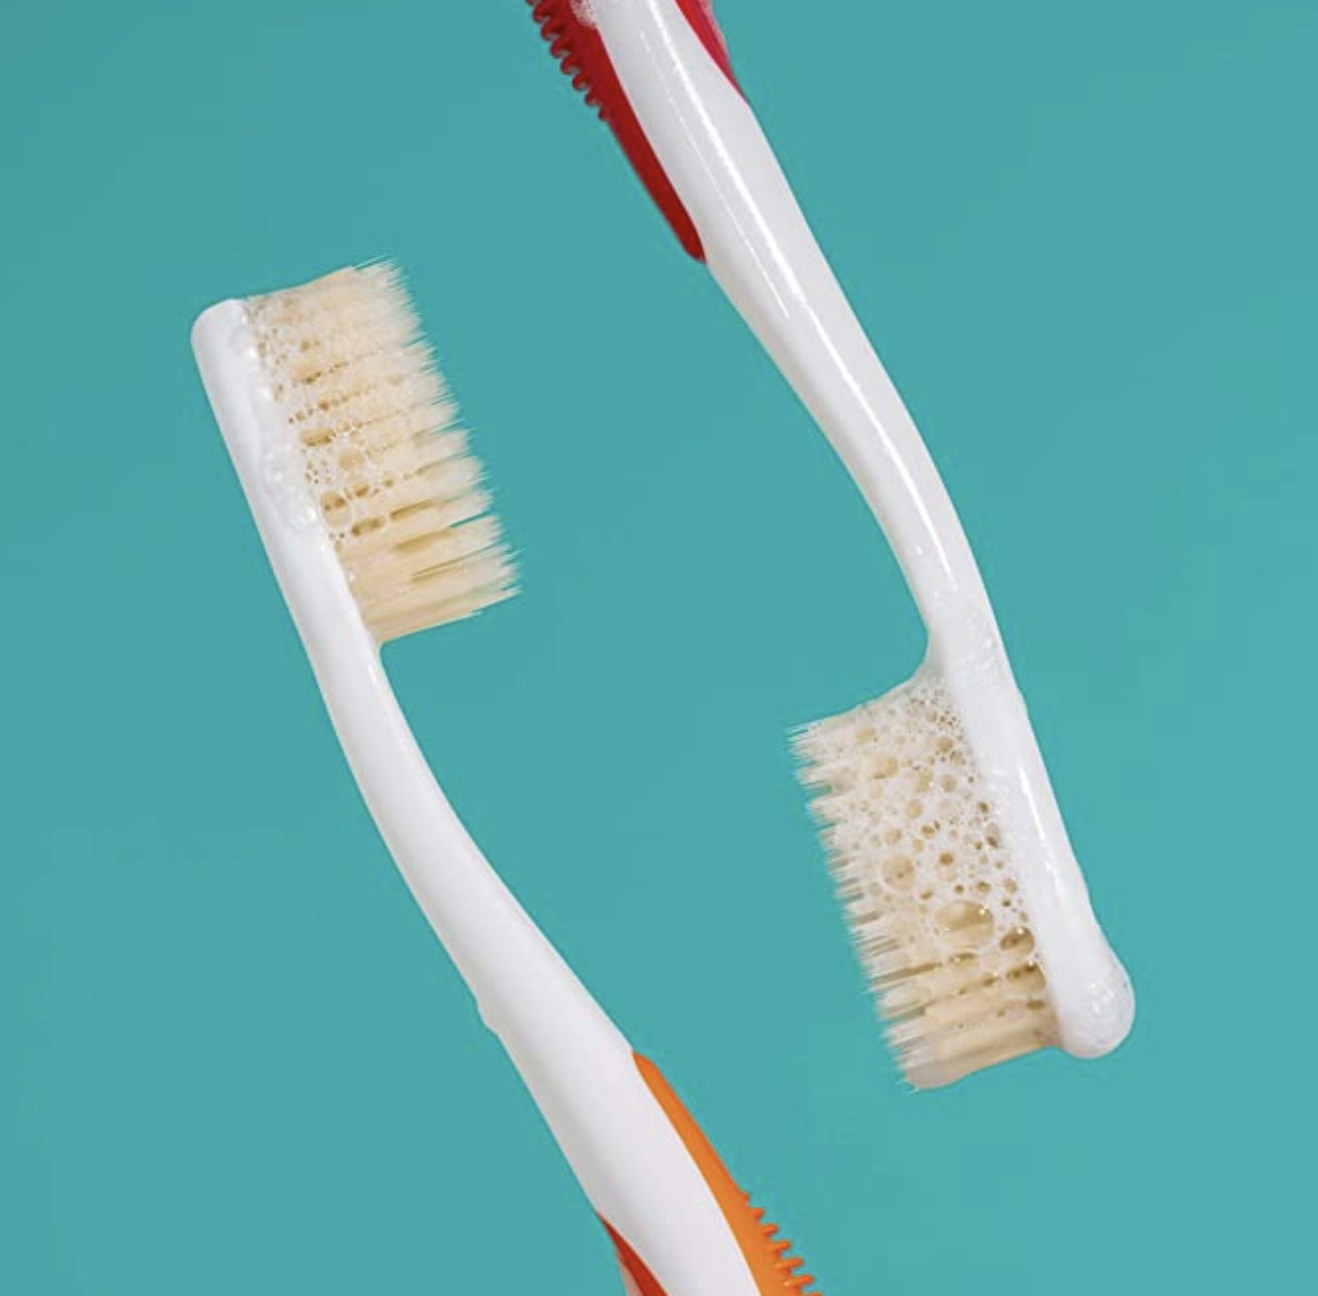 Two toothbrushes with suds on them